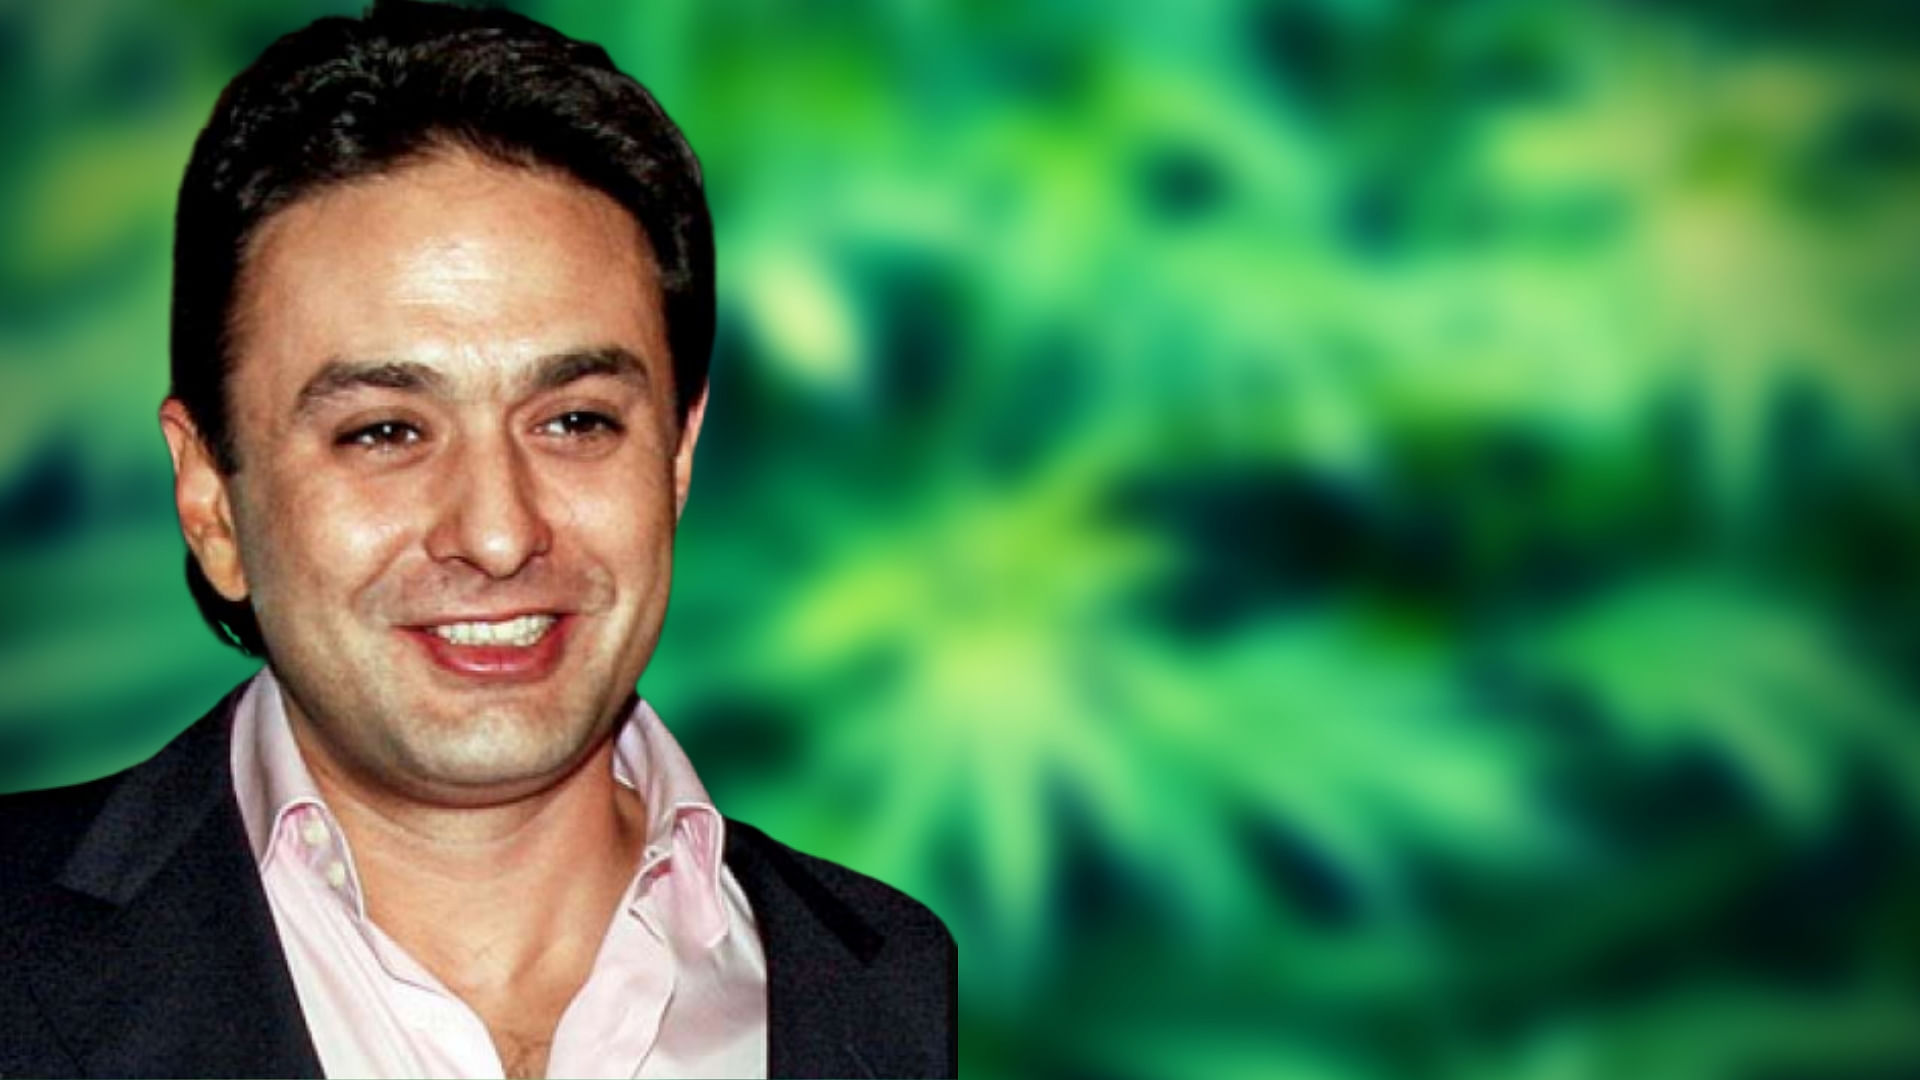 Ness Wadia admitted to the possession of drugs, saying that it was for his personal use.